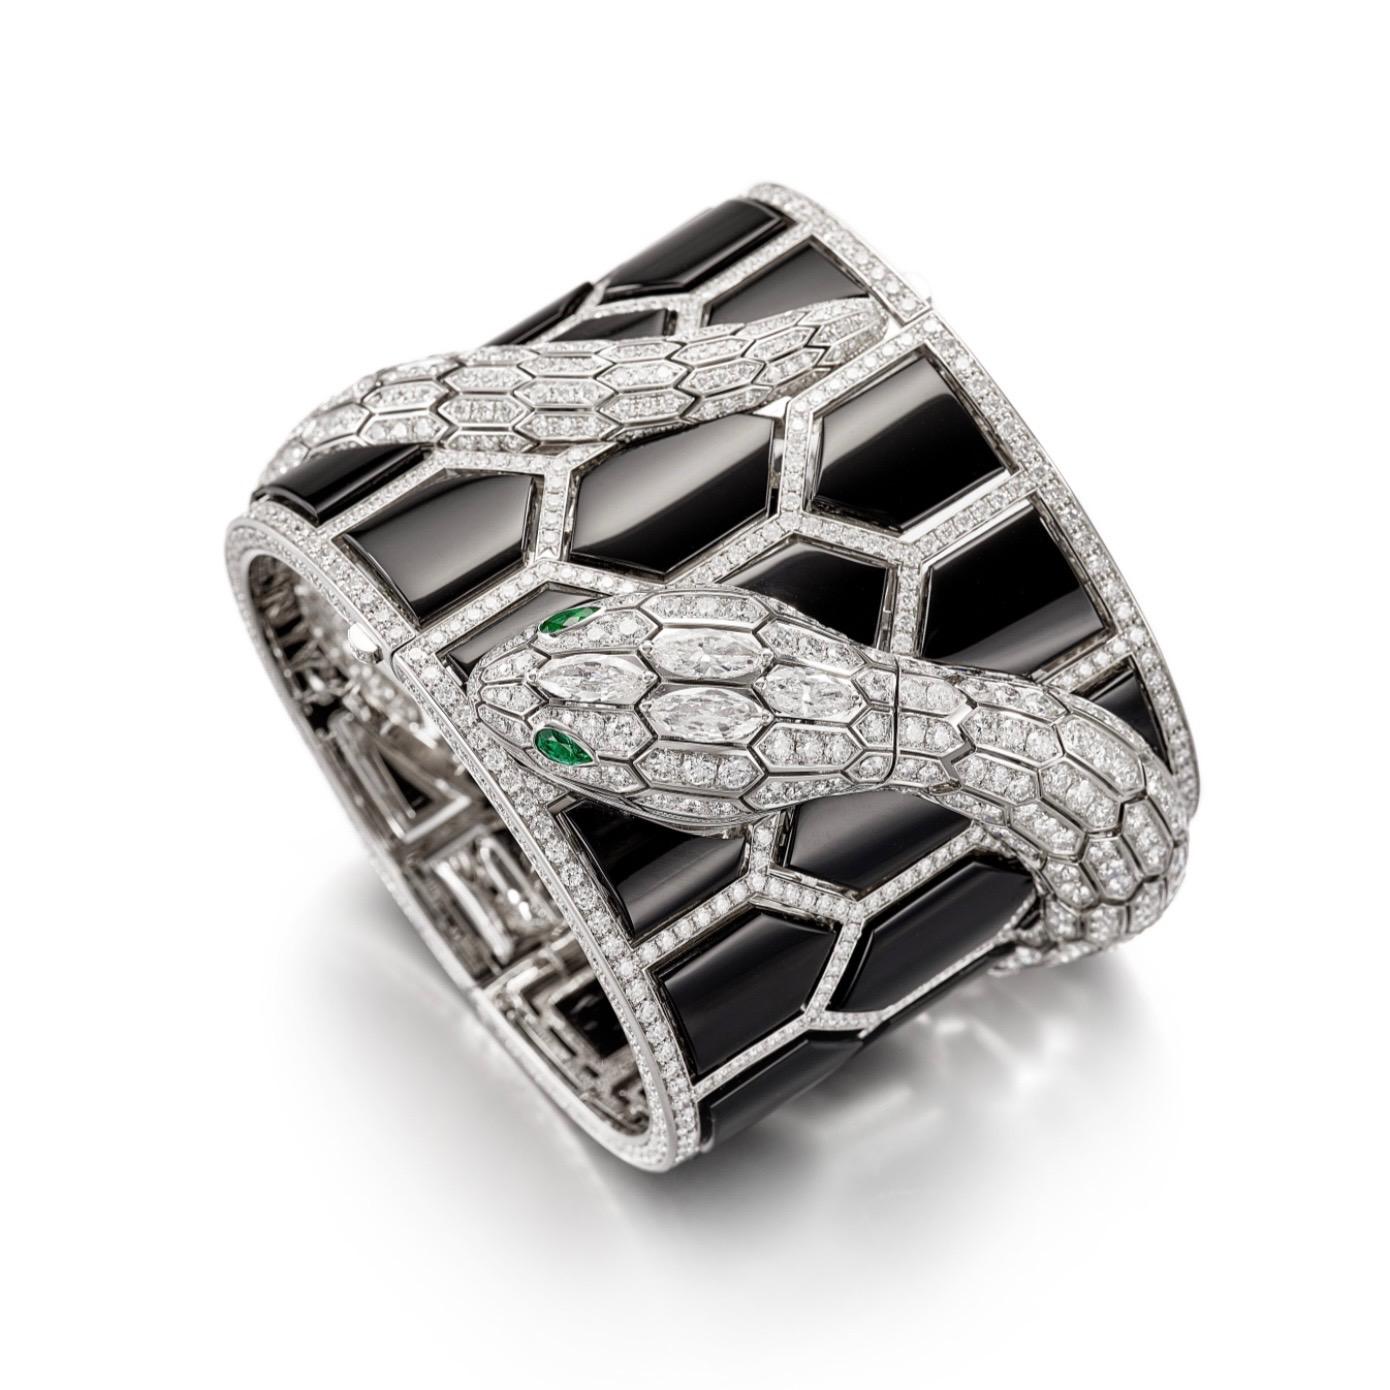 Bvlgari 'Serpenti Misteriosi Secret' Diamond, Onyx and Emerald Cuff-Watch, with 40.37 carats total weight of diamonds
All diamonds are E-G Color and VVS-VS Clarity. Quartz movement. Signed Bvlgari, Numbered xxxxx, Reference Code: xxxxx, Serial No.